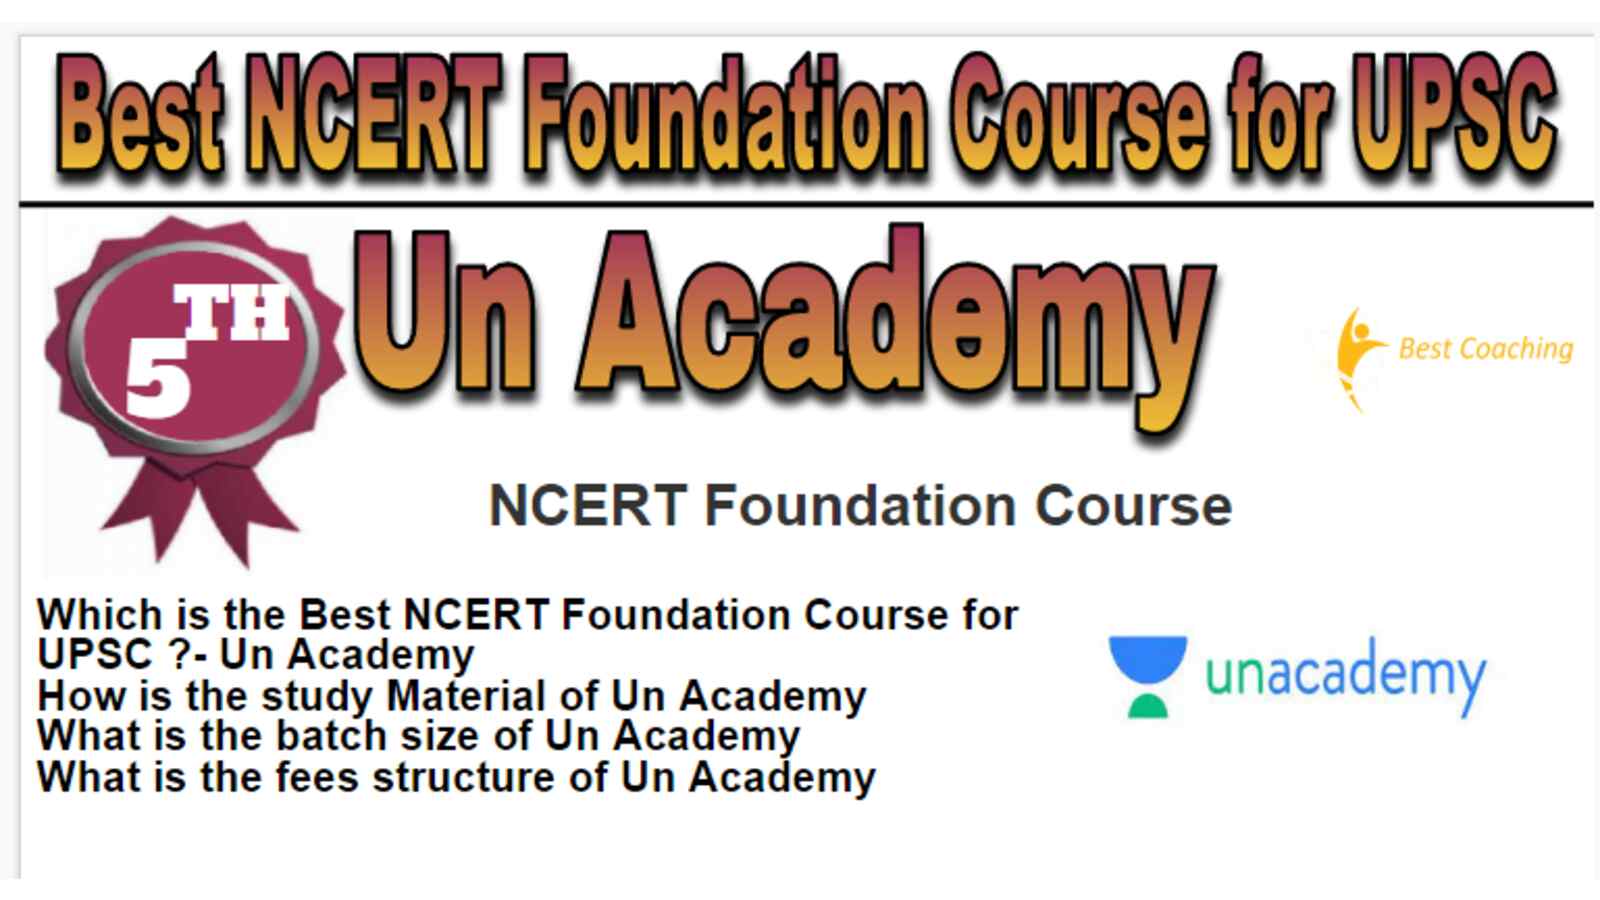 Rank 5 Best NCERT Foundation Course for UPSC 